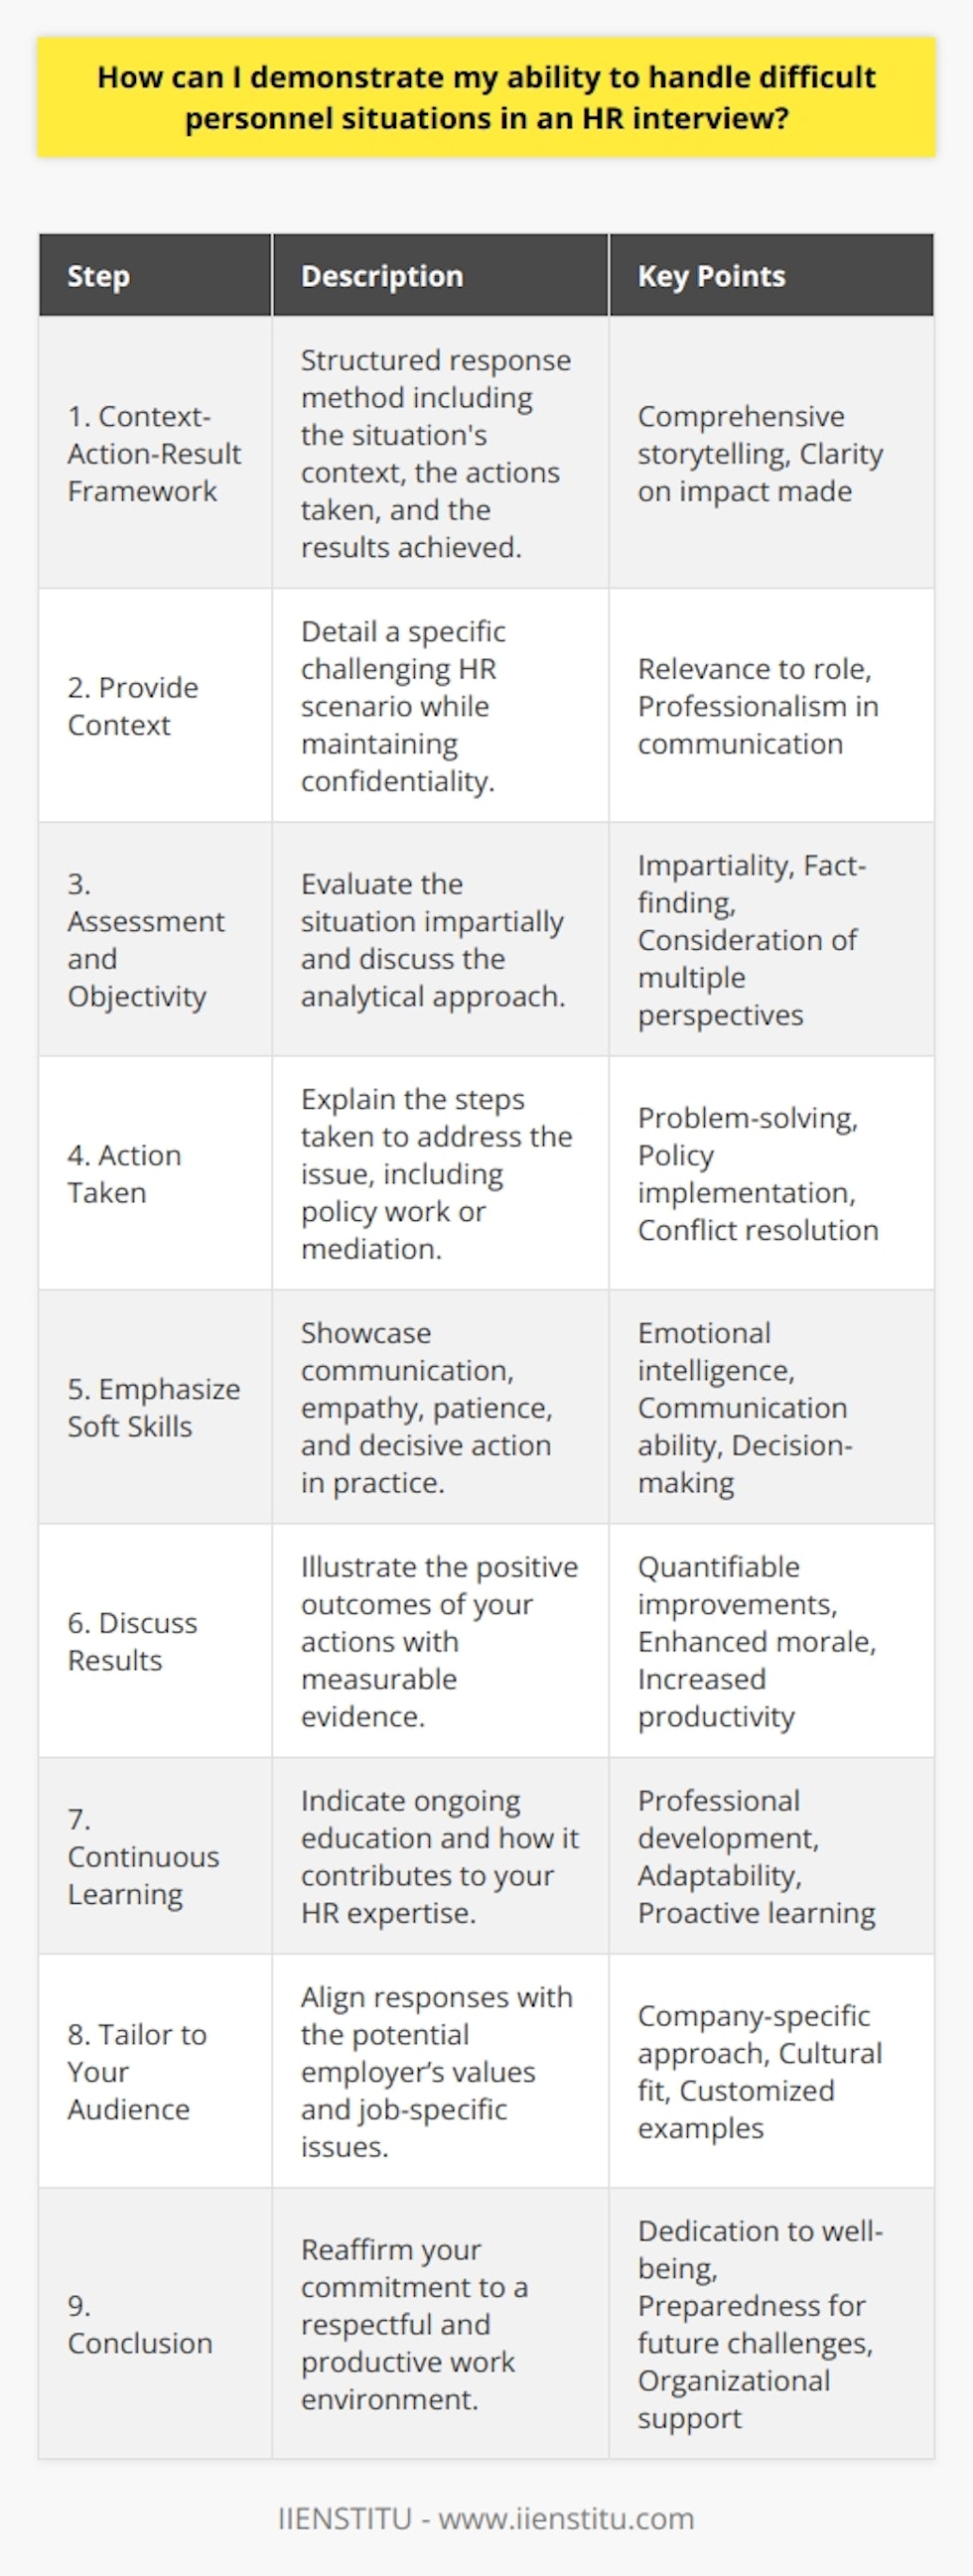 Demonstrating your ability to handle difficult personnel situations in an HR interview requires a structured approach where you clearly explain your methods, thought process, and the outcomes of the situations you have tackled. Here's how you might structure your response:1. **Context-Action-Result Framework**: To give a comprehensive answer, adopt the Context-Action-Result (CAR) framework. First, set the scene by describing a challenging situation you faced. Next, explain what actions you took to resolve the issue. Finally, share the results of your actions.2. **Provide Context**: Begin with specific scenarios where you faced a tough personnel issue. Maybe it was a conflict between team members, an issue of workplace harassment, a problem with employee performance, or handling layoffs. Be sure to present a situation that illustrates your hands-on experience with these sensitive matters. Avoid breaching confidentiality or speaking in a way that may reflect poorly on former colleagues or employers.3. **Assessment and Objectivity**: Discuss how you assessed the situation, making sure to point out how you remained impartial and gathered facts. Emphasize your analytical skills and describe the methods you used, whether they were one-on-one meetings, group discussions, or consultation with legal or ethical guidelines (where relevant). Make it clear that in your role, it was crucial to understand all perspectives before proceeding with a decision.4. **Action Taken**: After laying out the problem and your approach to understanding it, detail the specific steps you took to address the issue. This might include mediation sessions you organized, the disciplinary measures you enacted following company policy, training you recommended, or remedial actions that align with the situation. If you involved in creating or amending policies to prevent similar issues in the future, that would be particularly compelling to mention.5. **Emphasize Soft Skills**: Throughout, be sure to highlight your soft skills. Show how effective communication, empathy, patience, and decisive action – when necessary – played a role in the resolution of the situation. Provide examples of how you listened to all parties involved and maintained openness to different perspectives while keeping professional boundaries.6. **Discuss Results**: Conclude by sharing the impact of your actions. Illustrate how resolving the issue improved team morale, enhanced productivity, or perhaps led to a more inclusive workplace culture. If your intervention resulted in measurable outcomes (e.g., reduced turnover, increased engagement scores), mention these statistics to back up your example.7. **Continuous Learning**: Express how these experiences have further developed your HR acumen, possibly discussing any training or certifications (like those from IIENSTITU) that have extended your skill set. Highlighting continuous education or professional development in HR shows that you are proactive about staying ahead in your field.8. **Tailor to Your Audience**: Make sure to align your examples with the company's values and the specifics of the job you're interviewing for. If you are aware that the organization you are interviewing with has faced similar challenges, it's beneficial to frame your answer in a way that shows you can deal with their specific concerns.9. **Conclusion**: Summarize by reinforcing your commitment to creating a respectful and productive work environment and your adeptness at navigating complex personnel issues should they arise. Indicate that you are well-prepared to handle similar challenges in the future and are committed to the well-being of the organization's workforce.By focusing on real-life situations and the valuable outcomes of your interventions, you can effectively demonstrate your capability to manage difficult personnel situations to your potential employer in an HR interview.